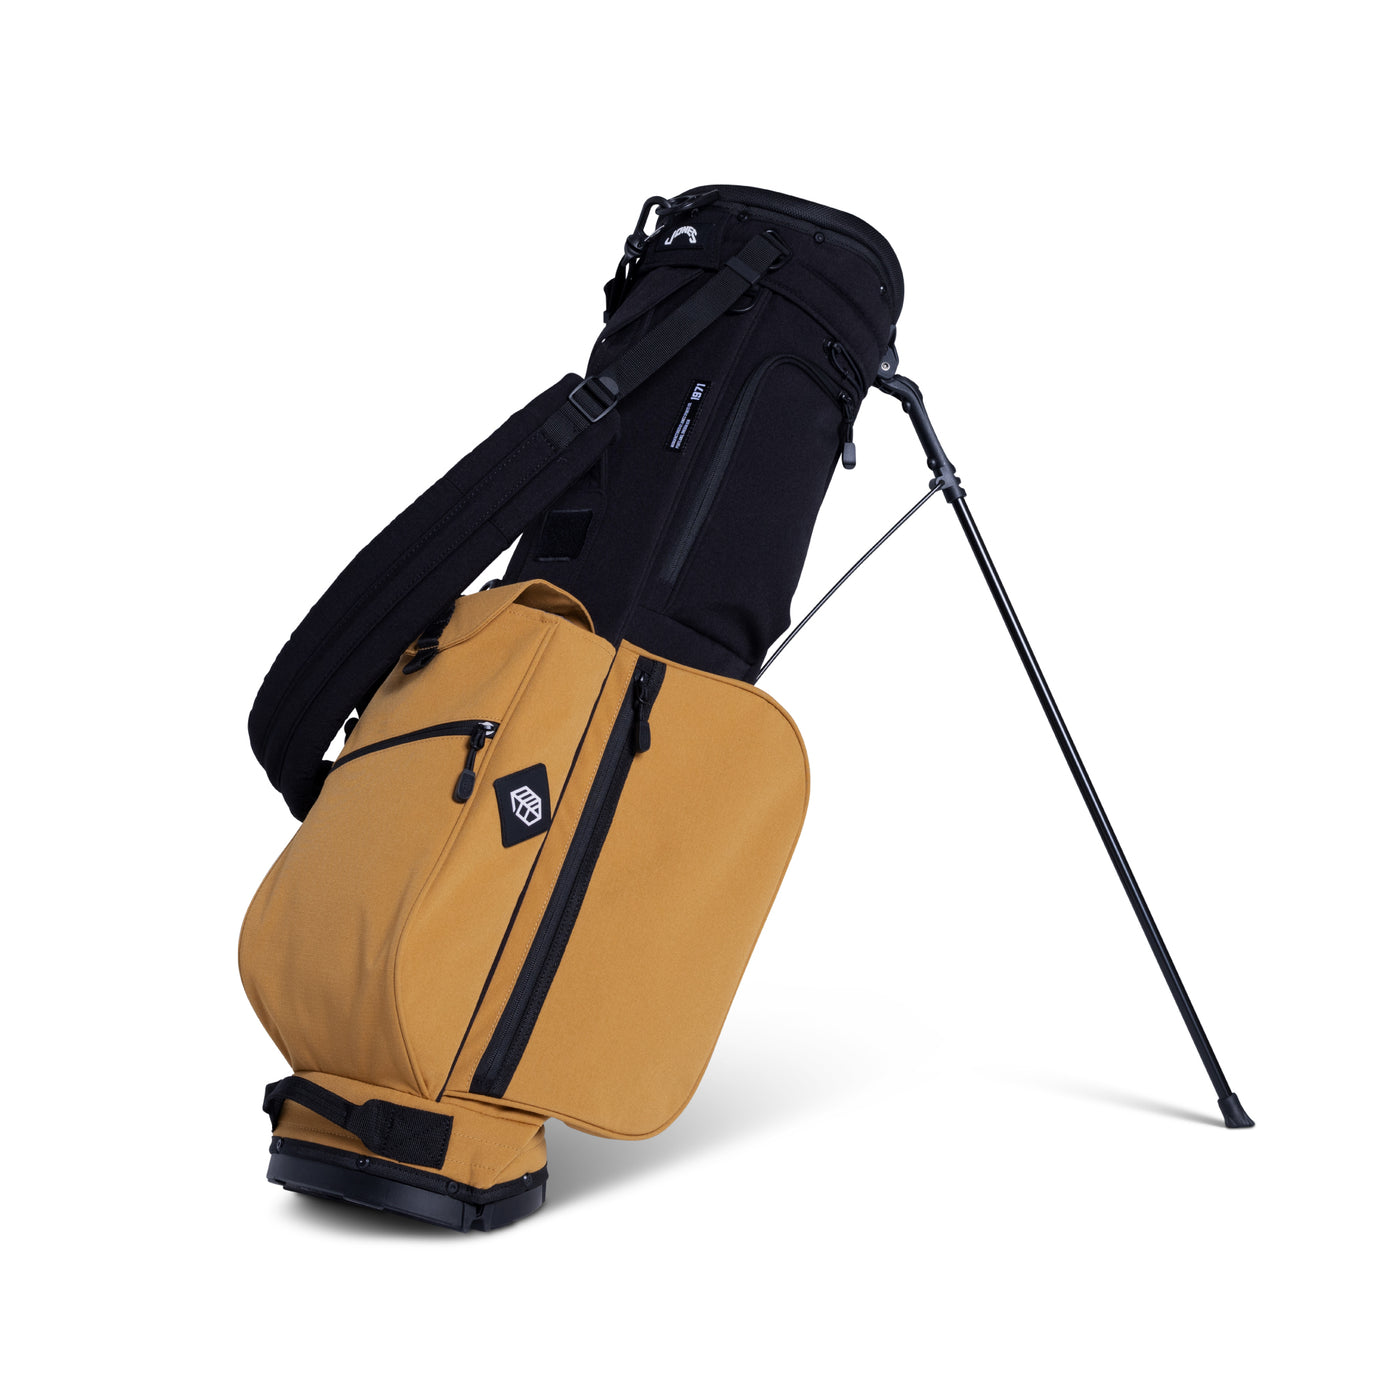 Rover Stand Bag - Black/Wheat